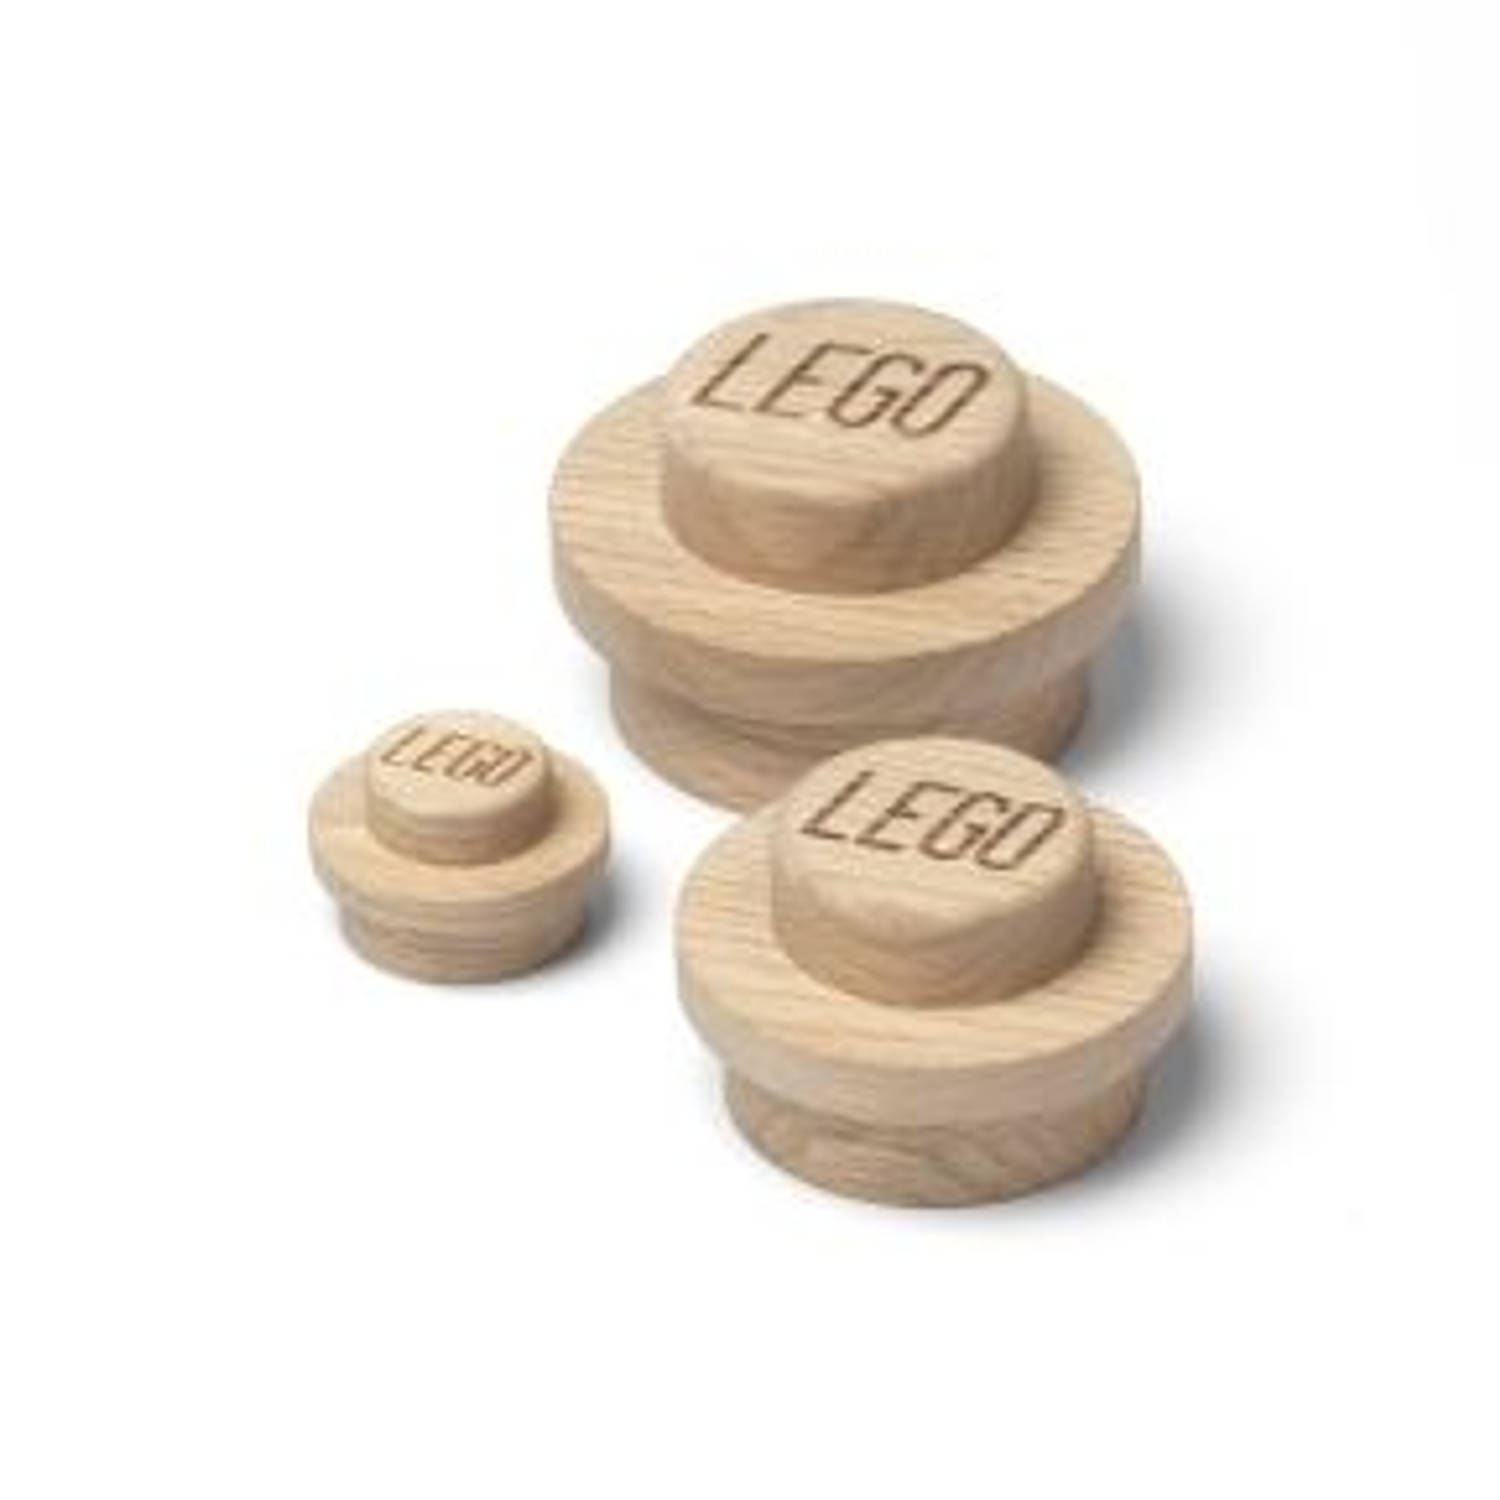 Lego Wooden Collection - Wood Wall Hanger Set of 3 Pieces